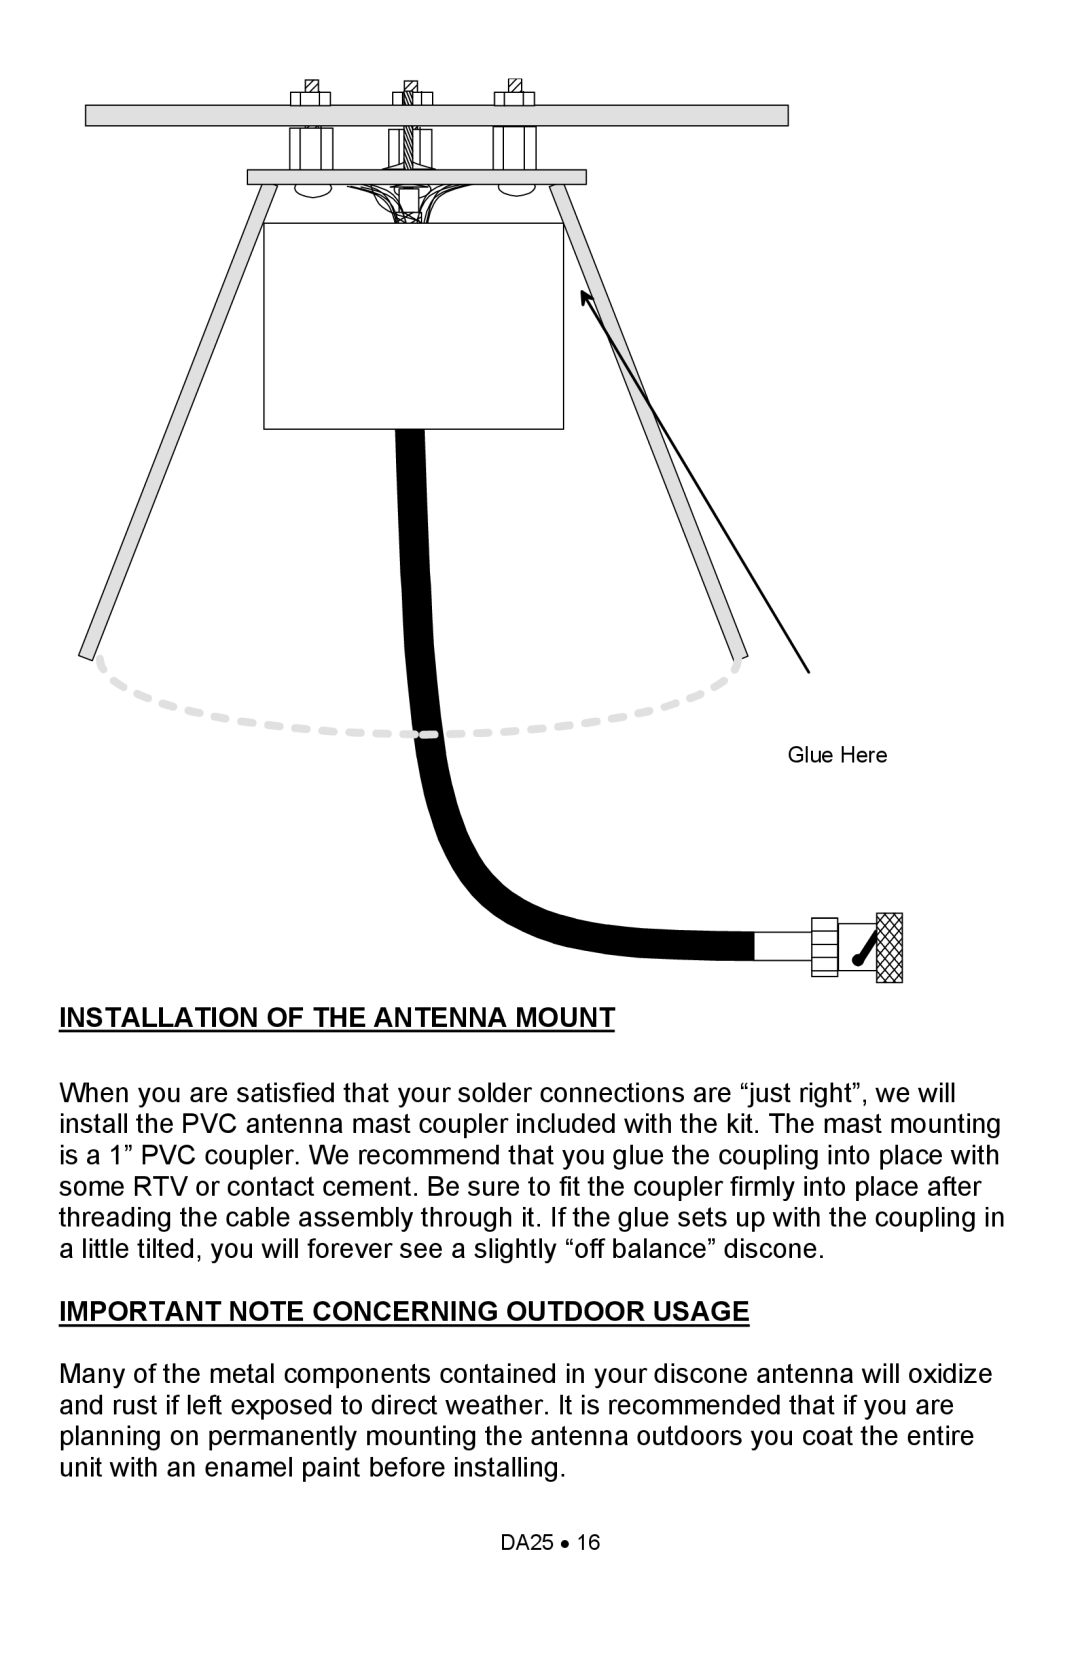 Ramsey Electronics DA25 manual Installation Of The Antenna Mount, Important Note Concerning Outdoor Usage, Glue Here 